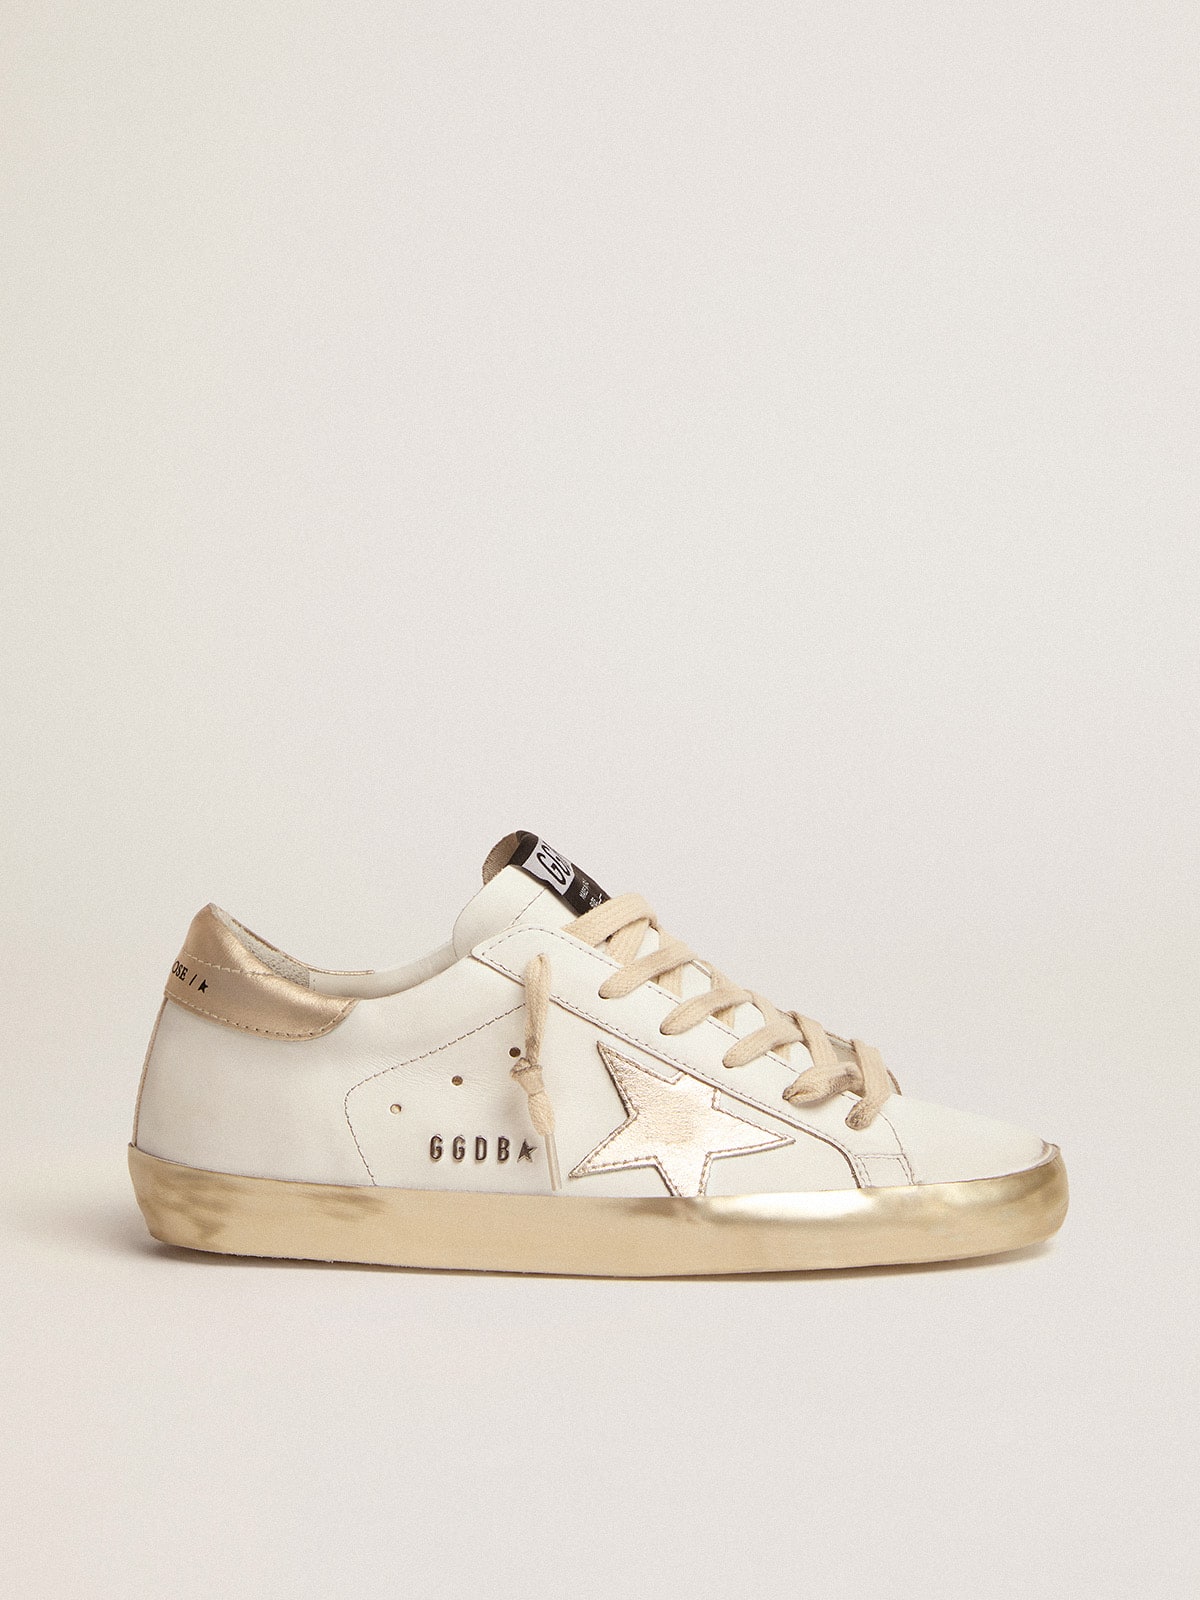 Women’s Super-Star sneakers with gold foxing | Golden Goose